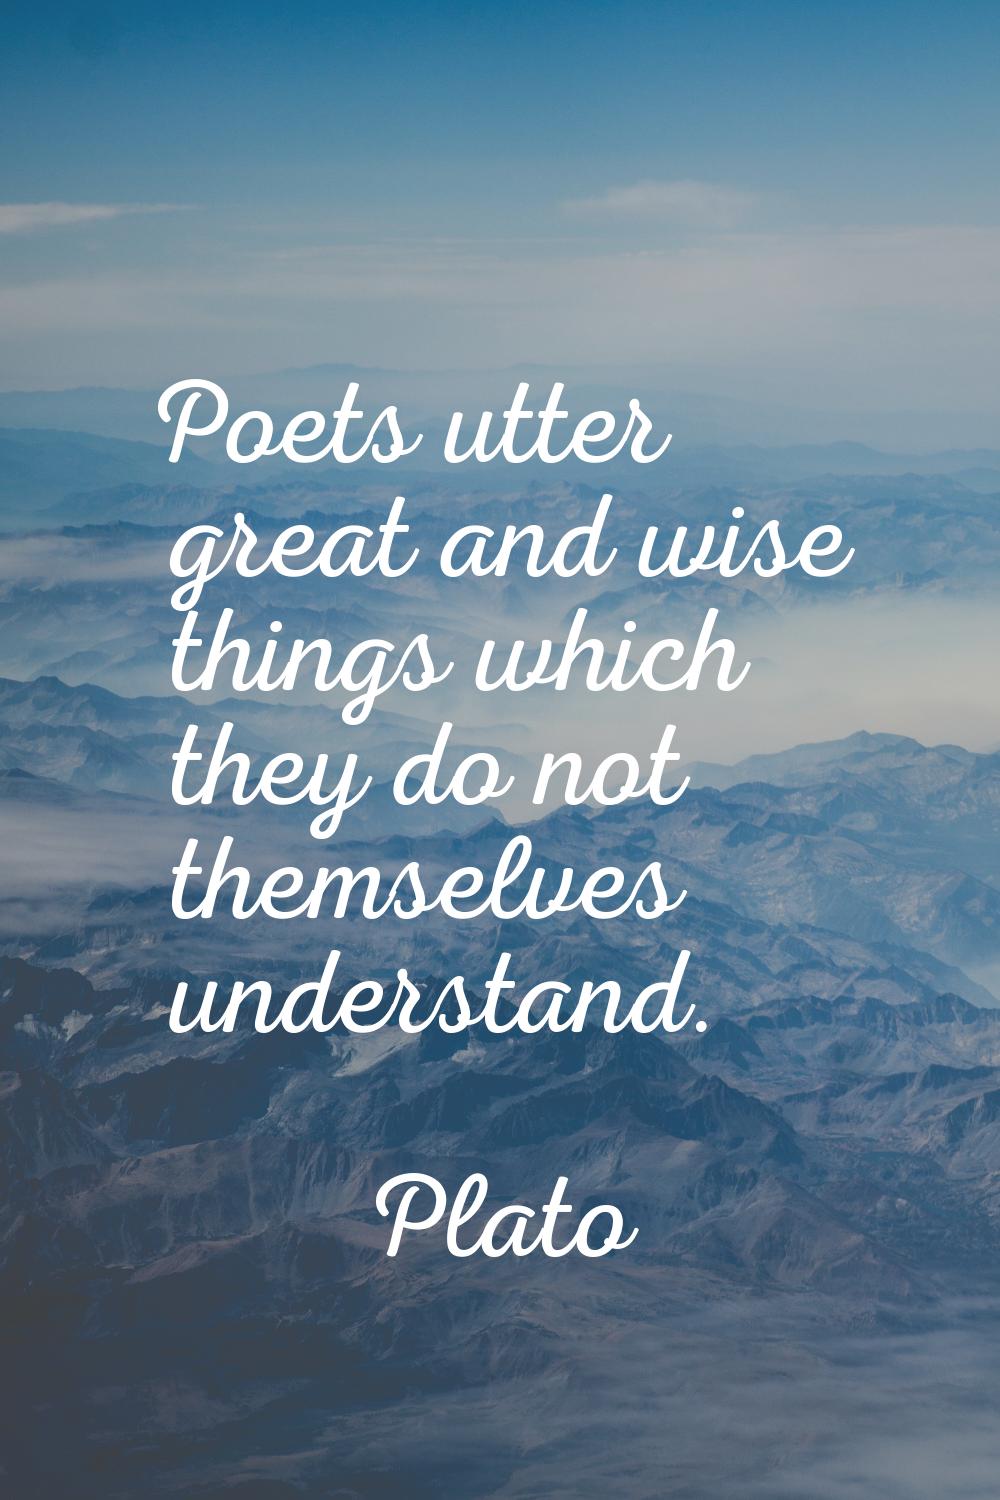 Poets utter great and wise things which they do not themselves understand.